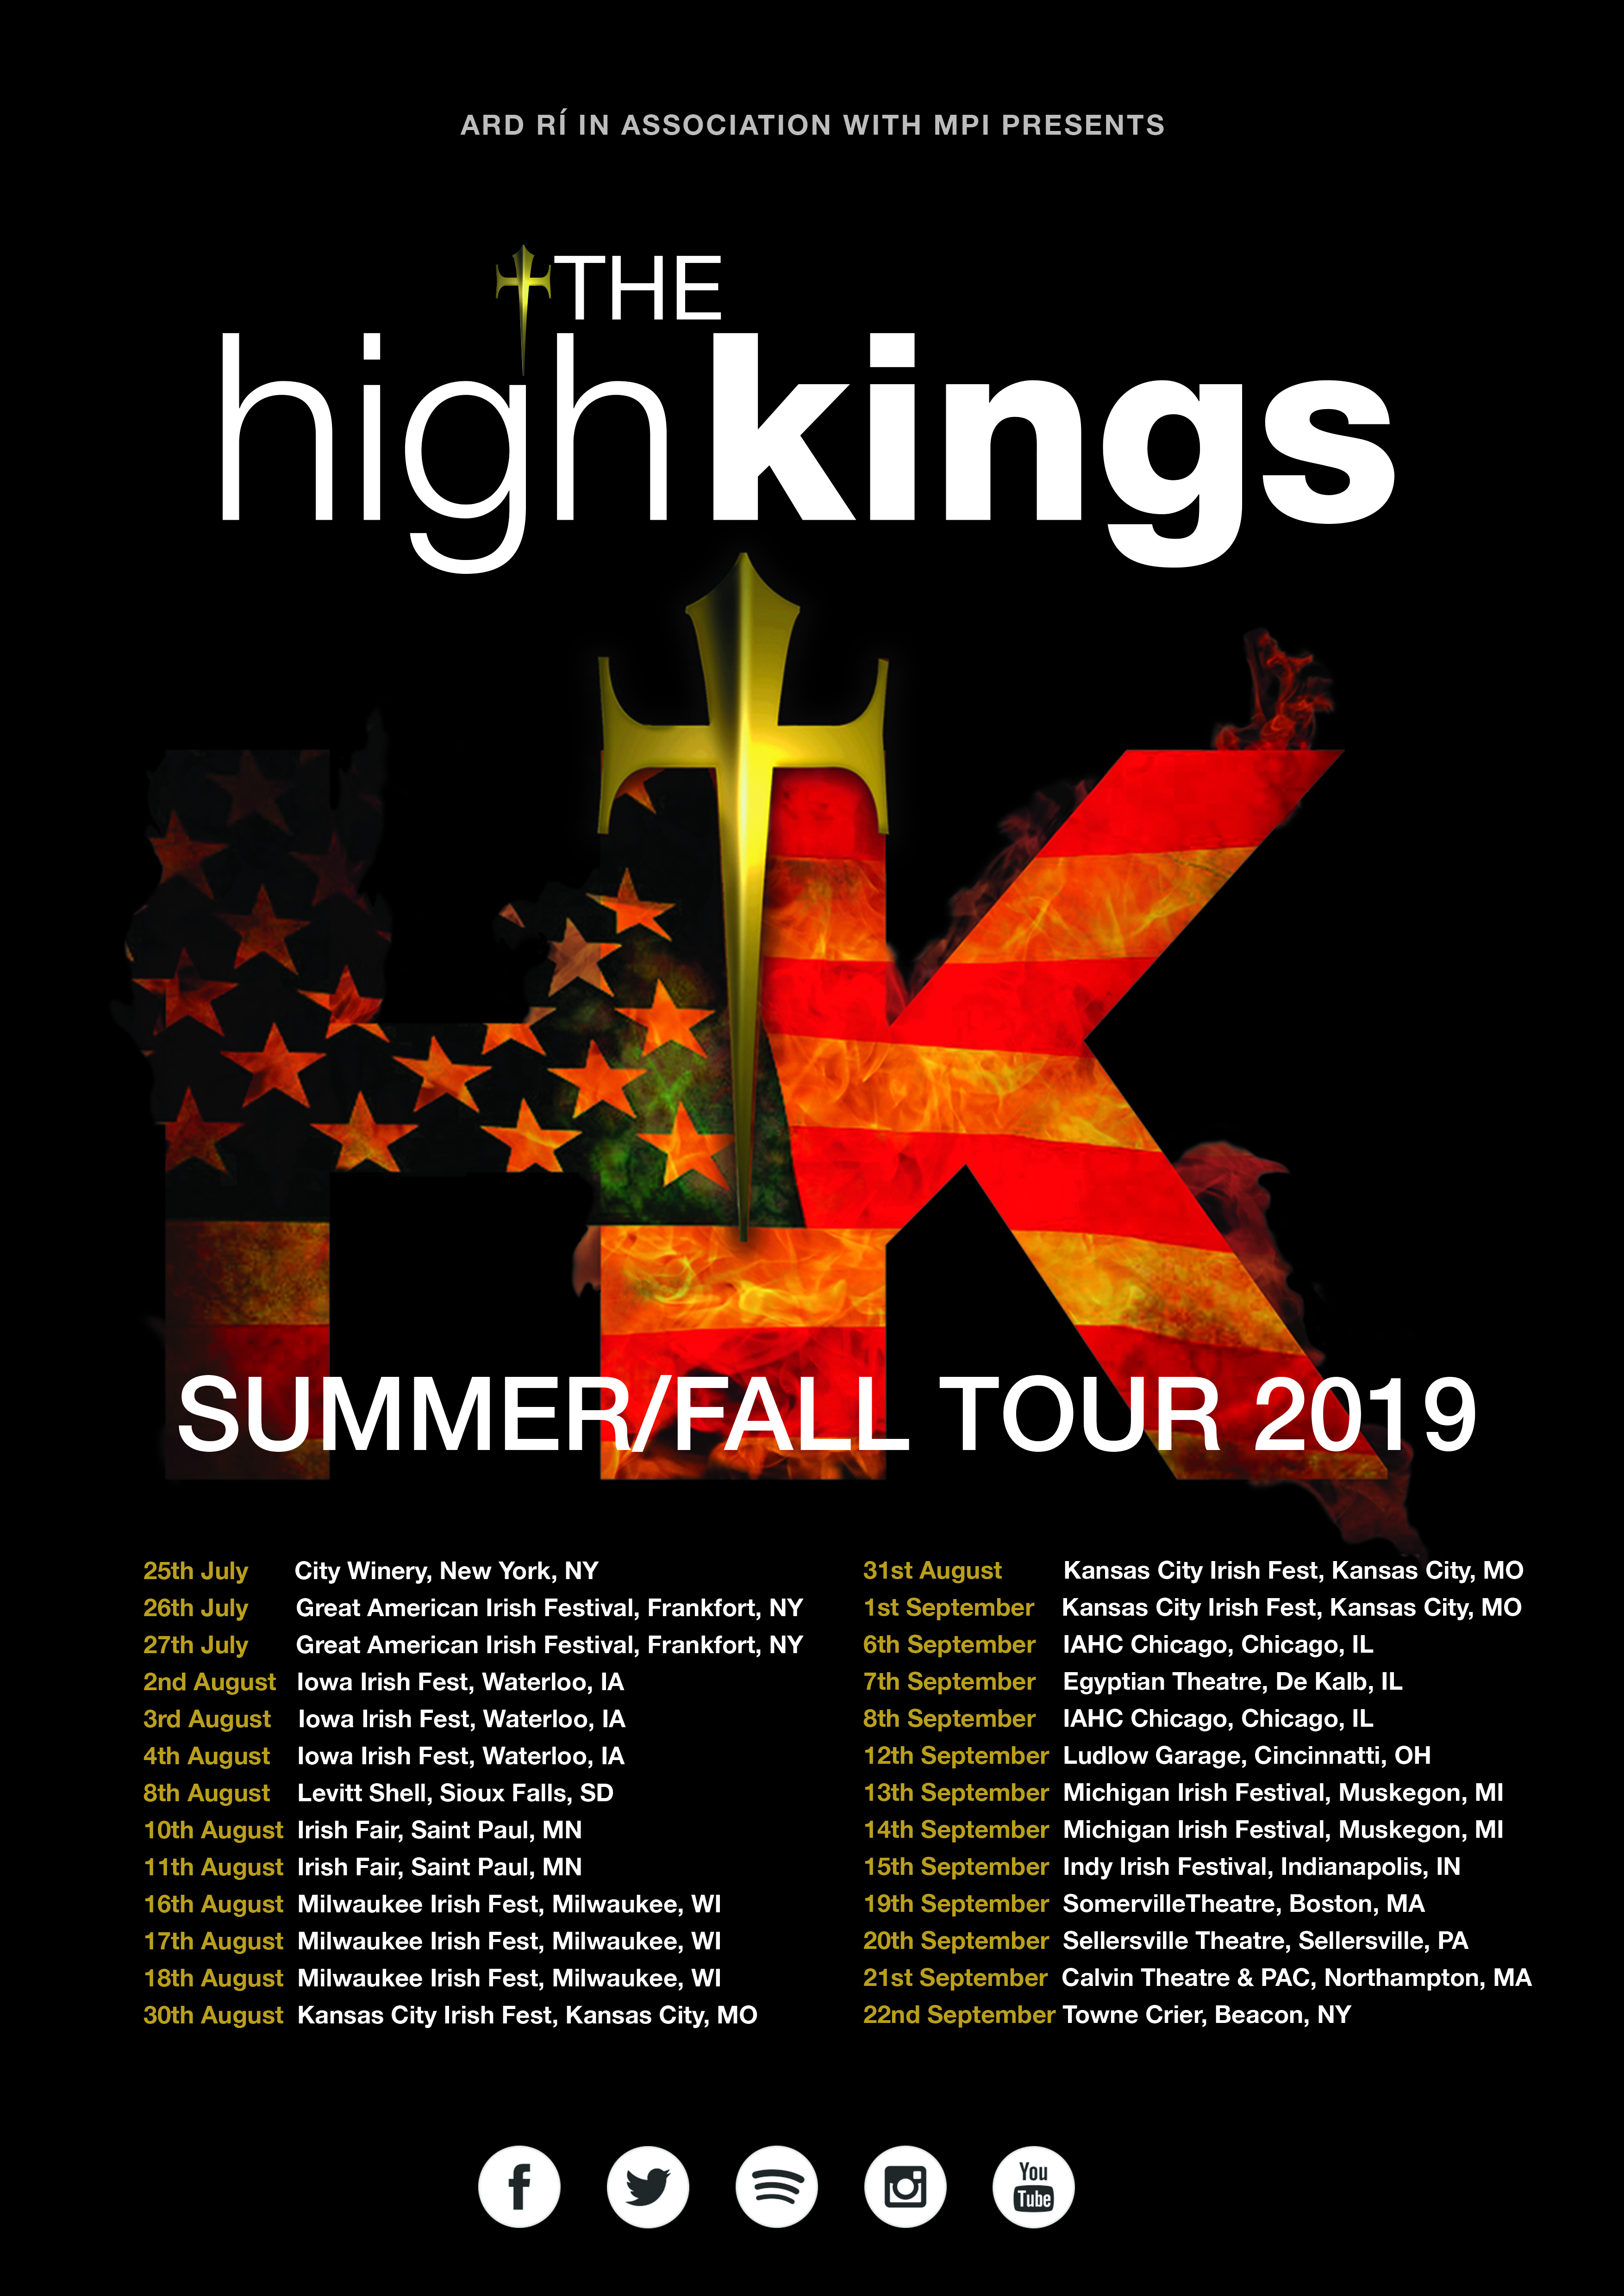 10 days before the first show of The High Kings Summer tour of the USA.